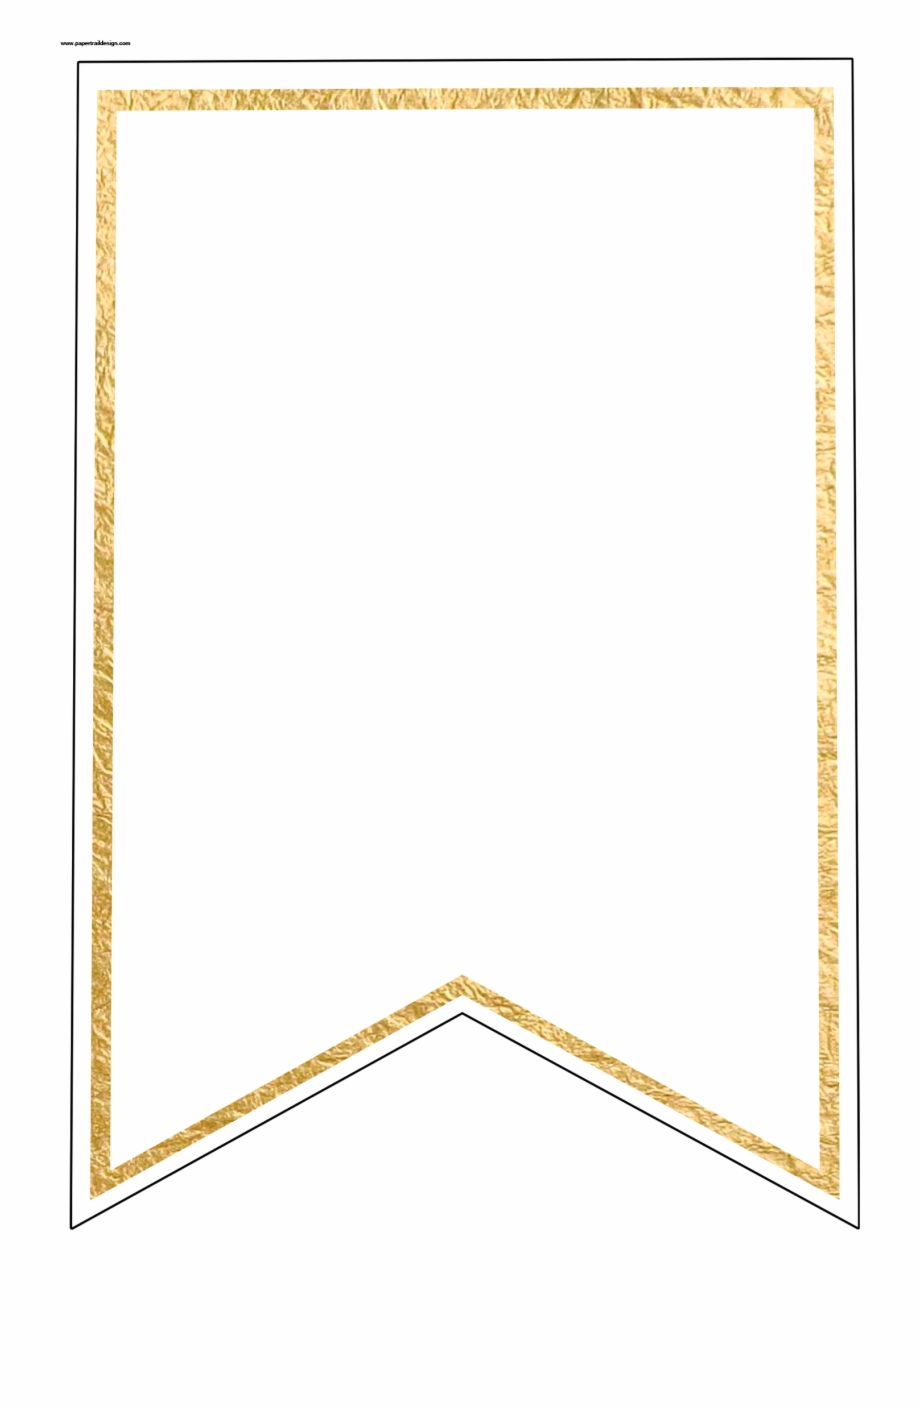 Gold pennant banner.